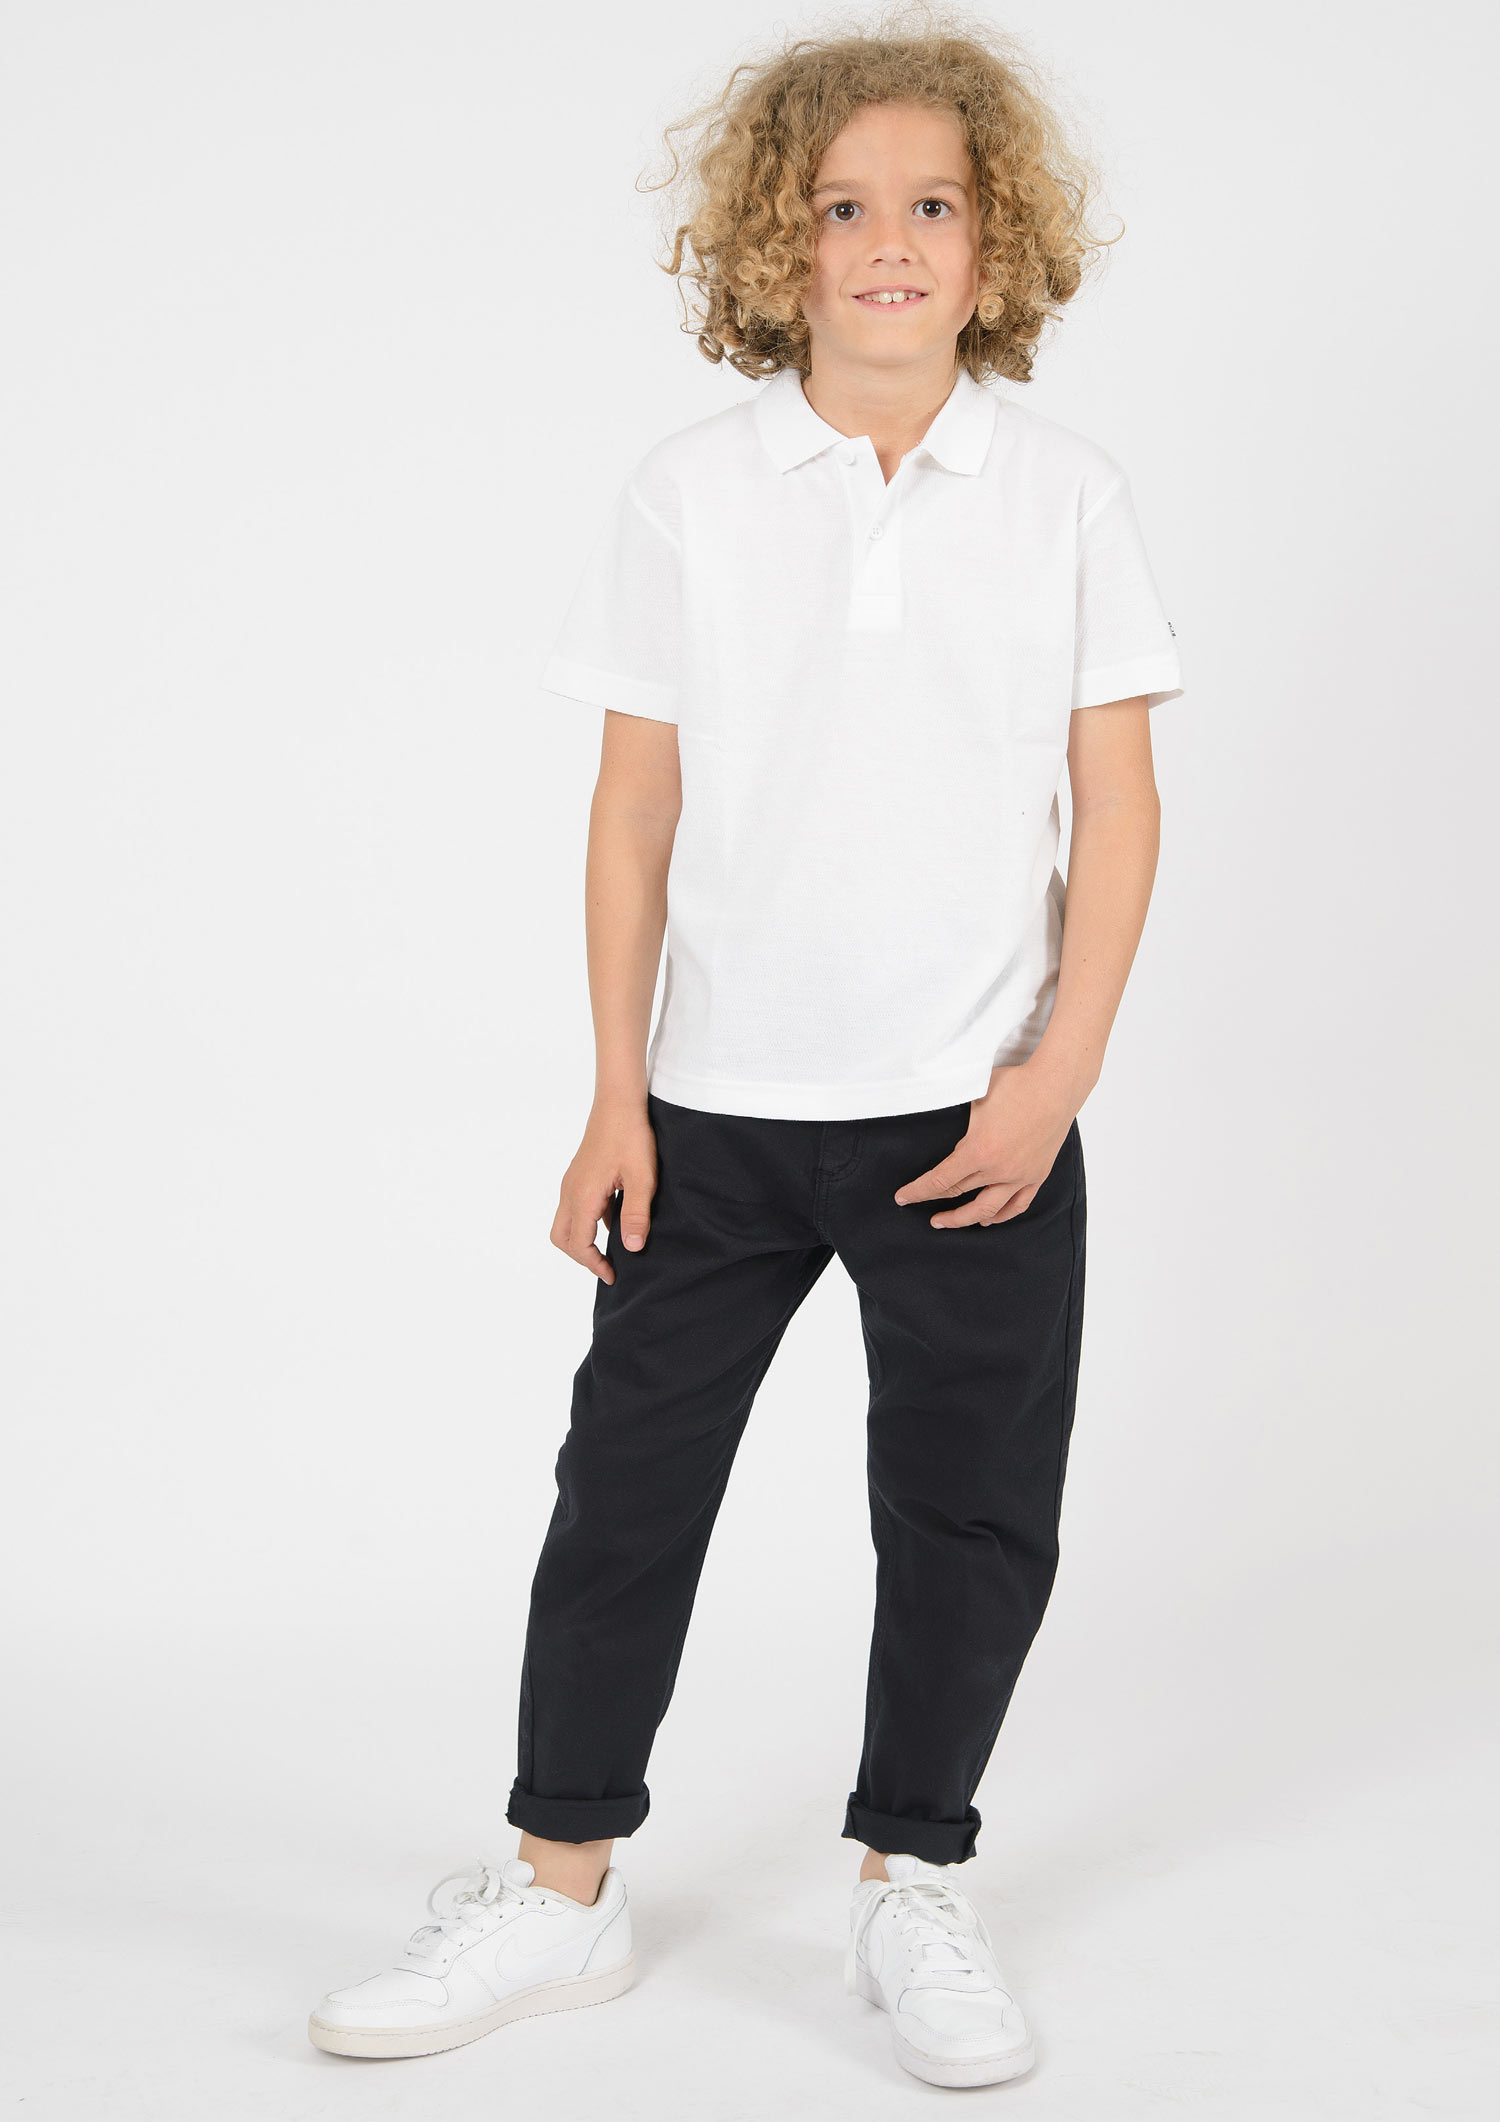 2850-Boys Loose Fit Pant available in Normal